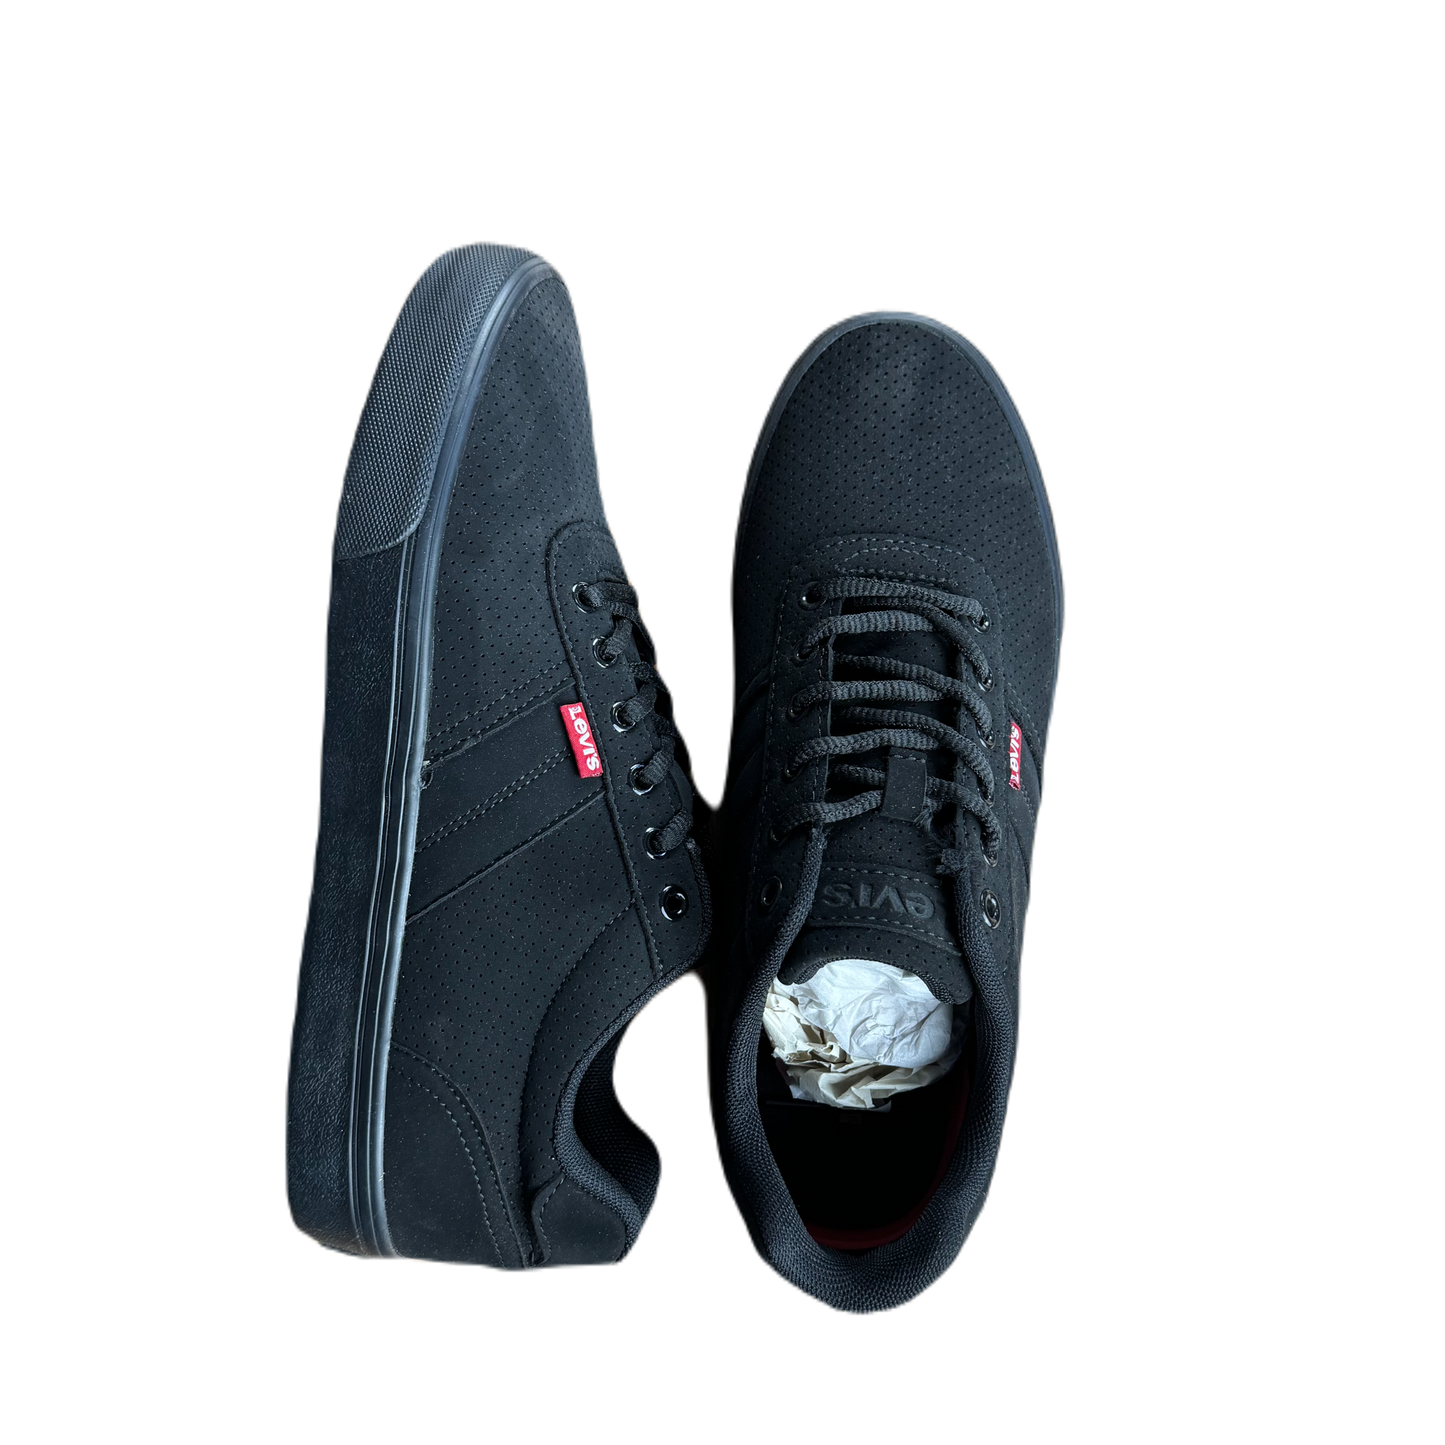 Levi's sneakers in all black